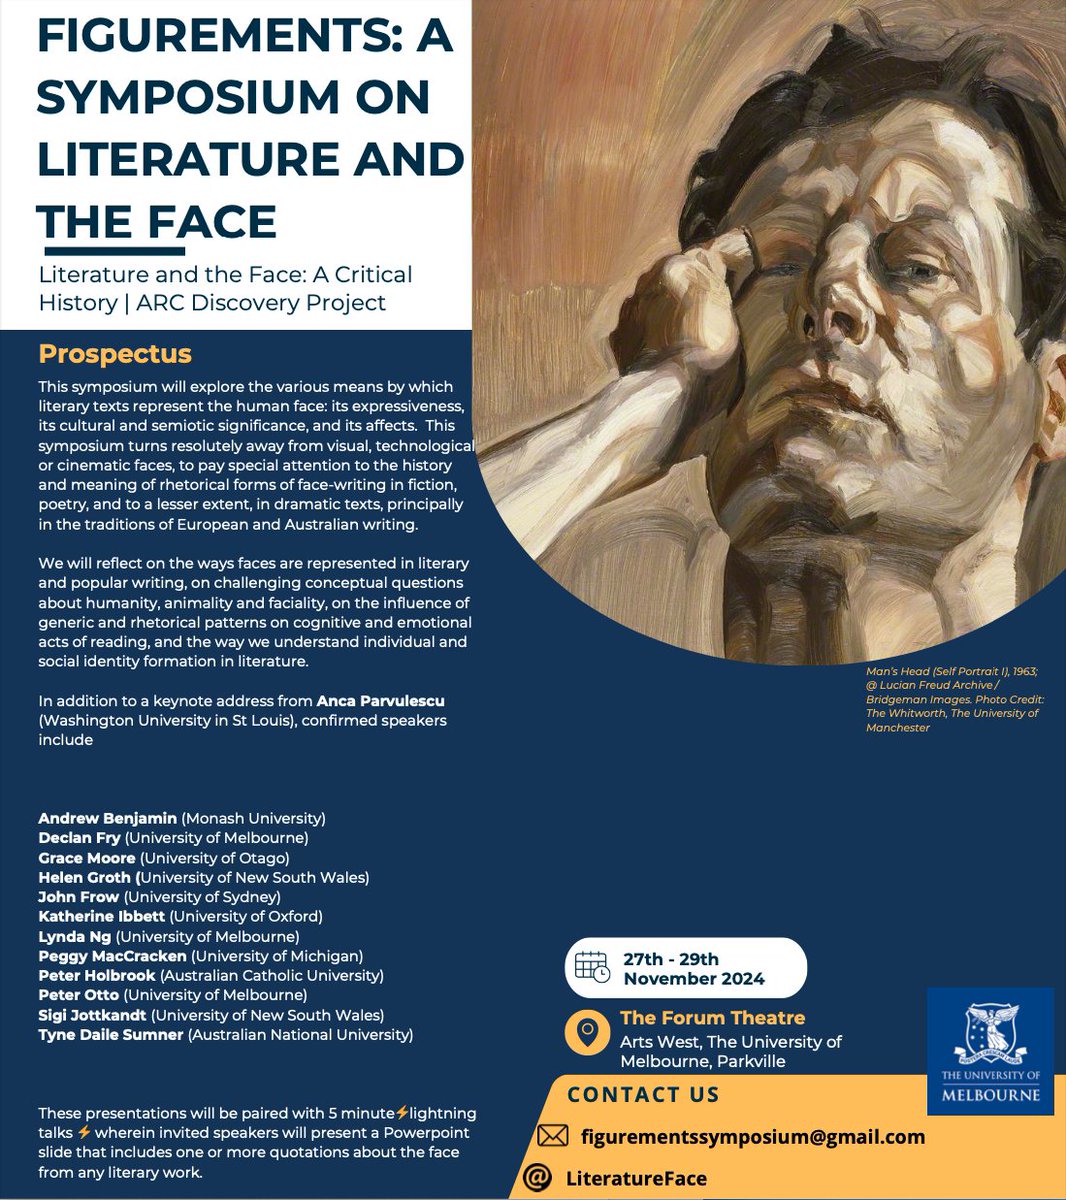 I'm excited to finally share the details of our culminating project event: 'Figurements: A Symposium on Literature & the Face.' 27th-29th November at @UniMelb! Registration and more details in the next few weeks. Keep an eye on things here: face.hypotheses.org/figurements-a-… 👁️👁️👁️